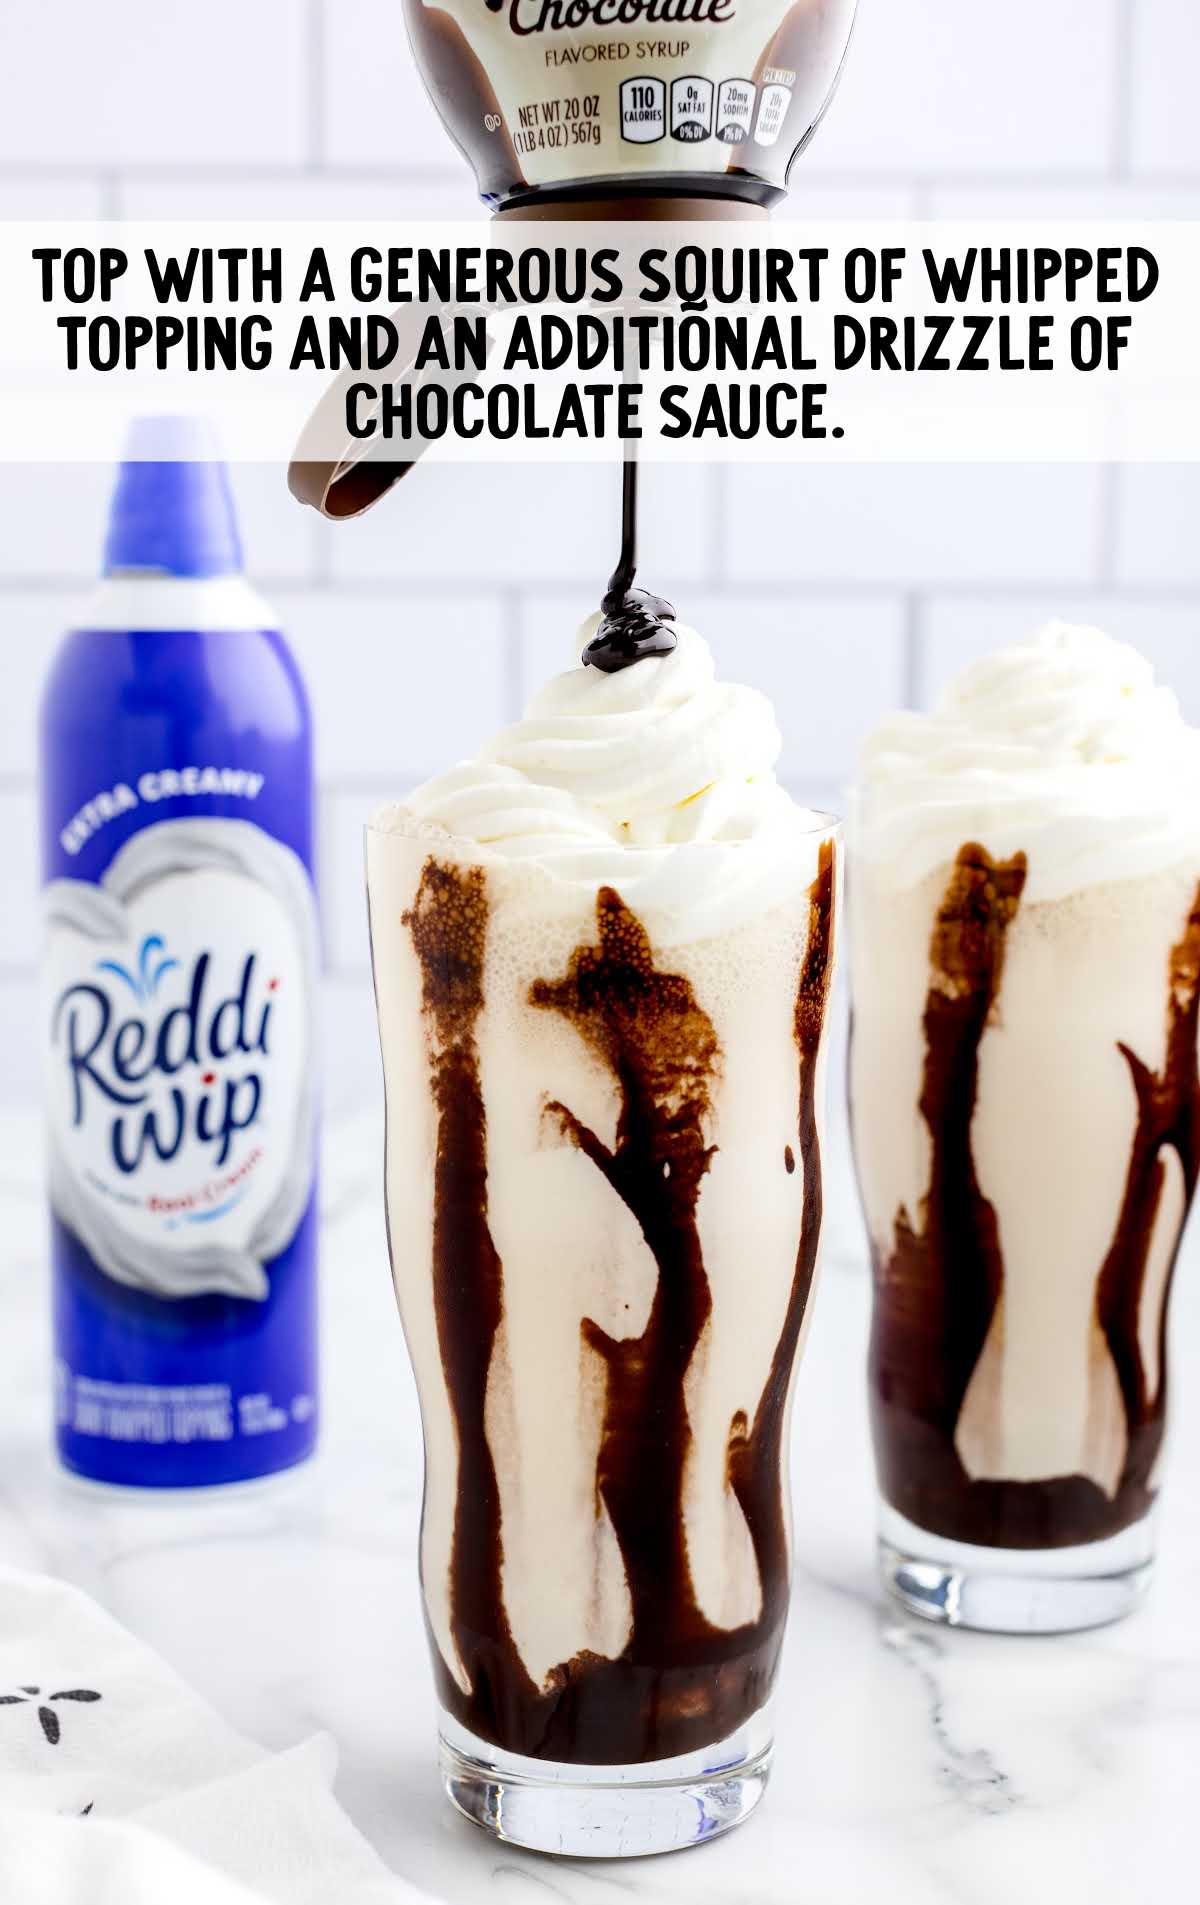 whipped topping and chocolate sauce topped on top of the drink